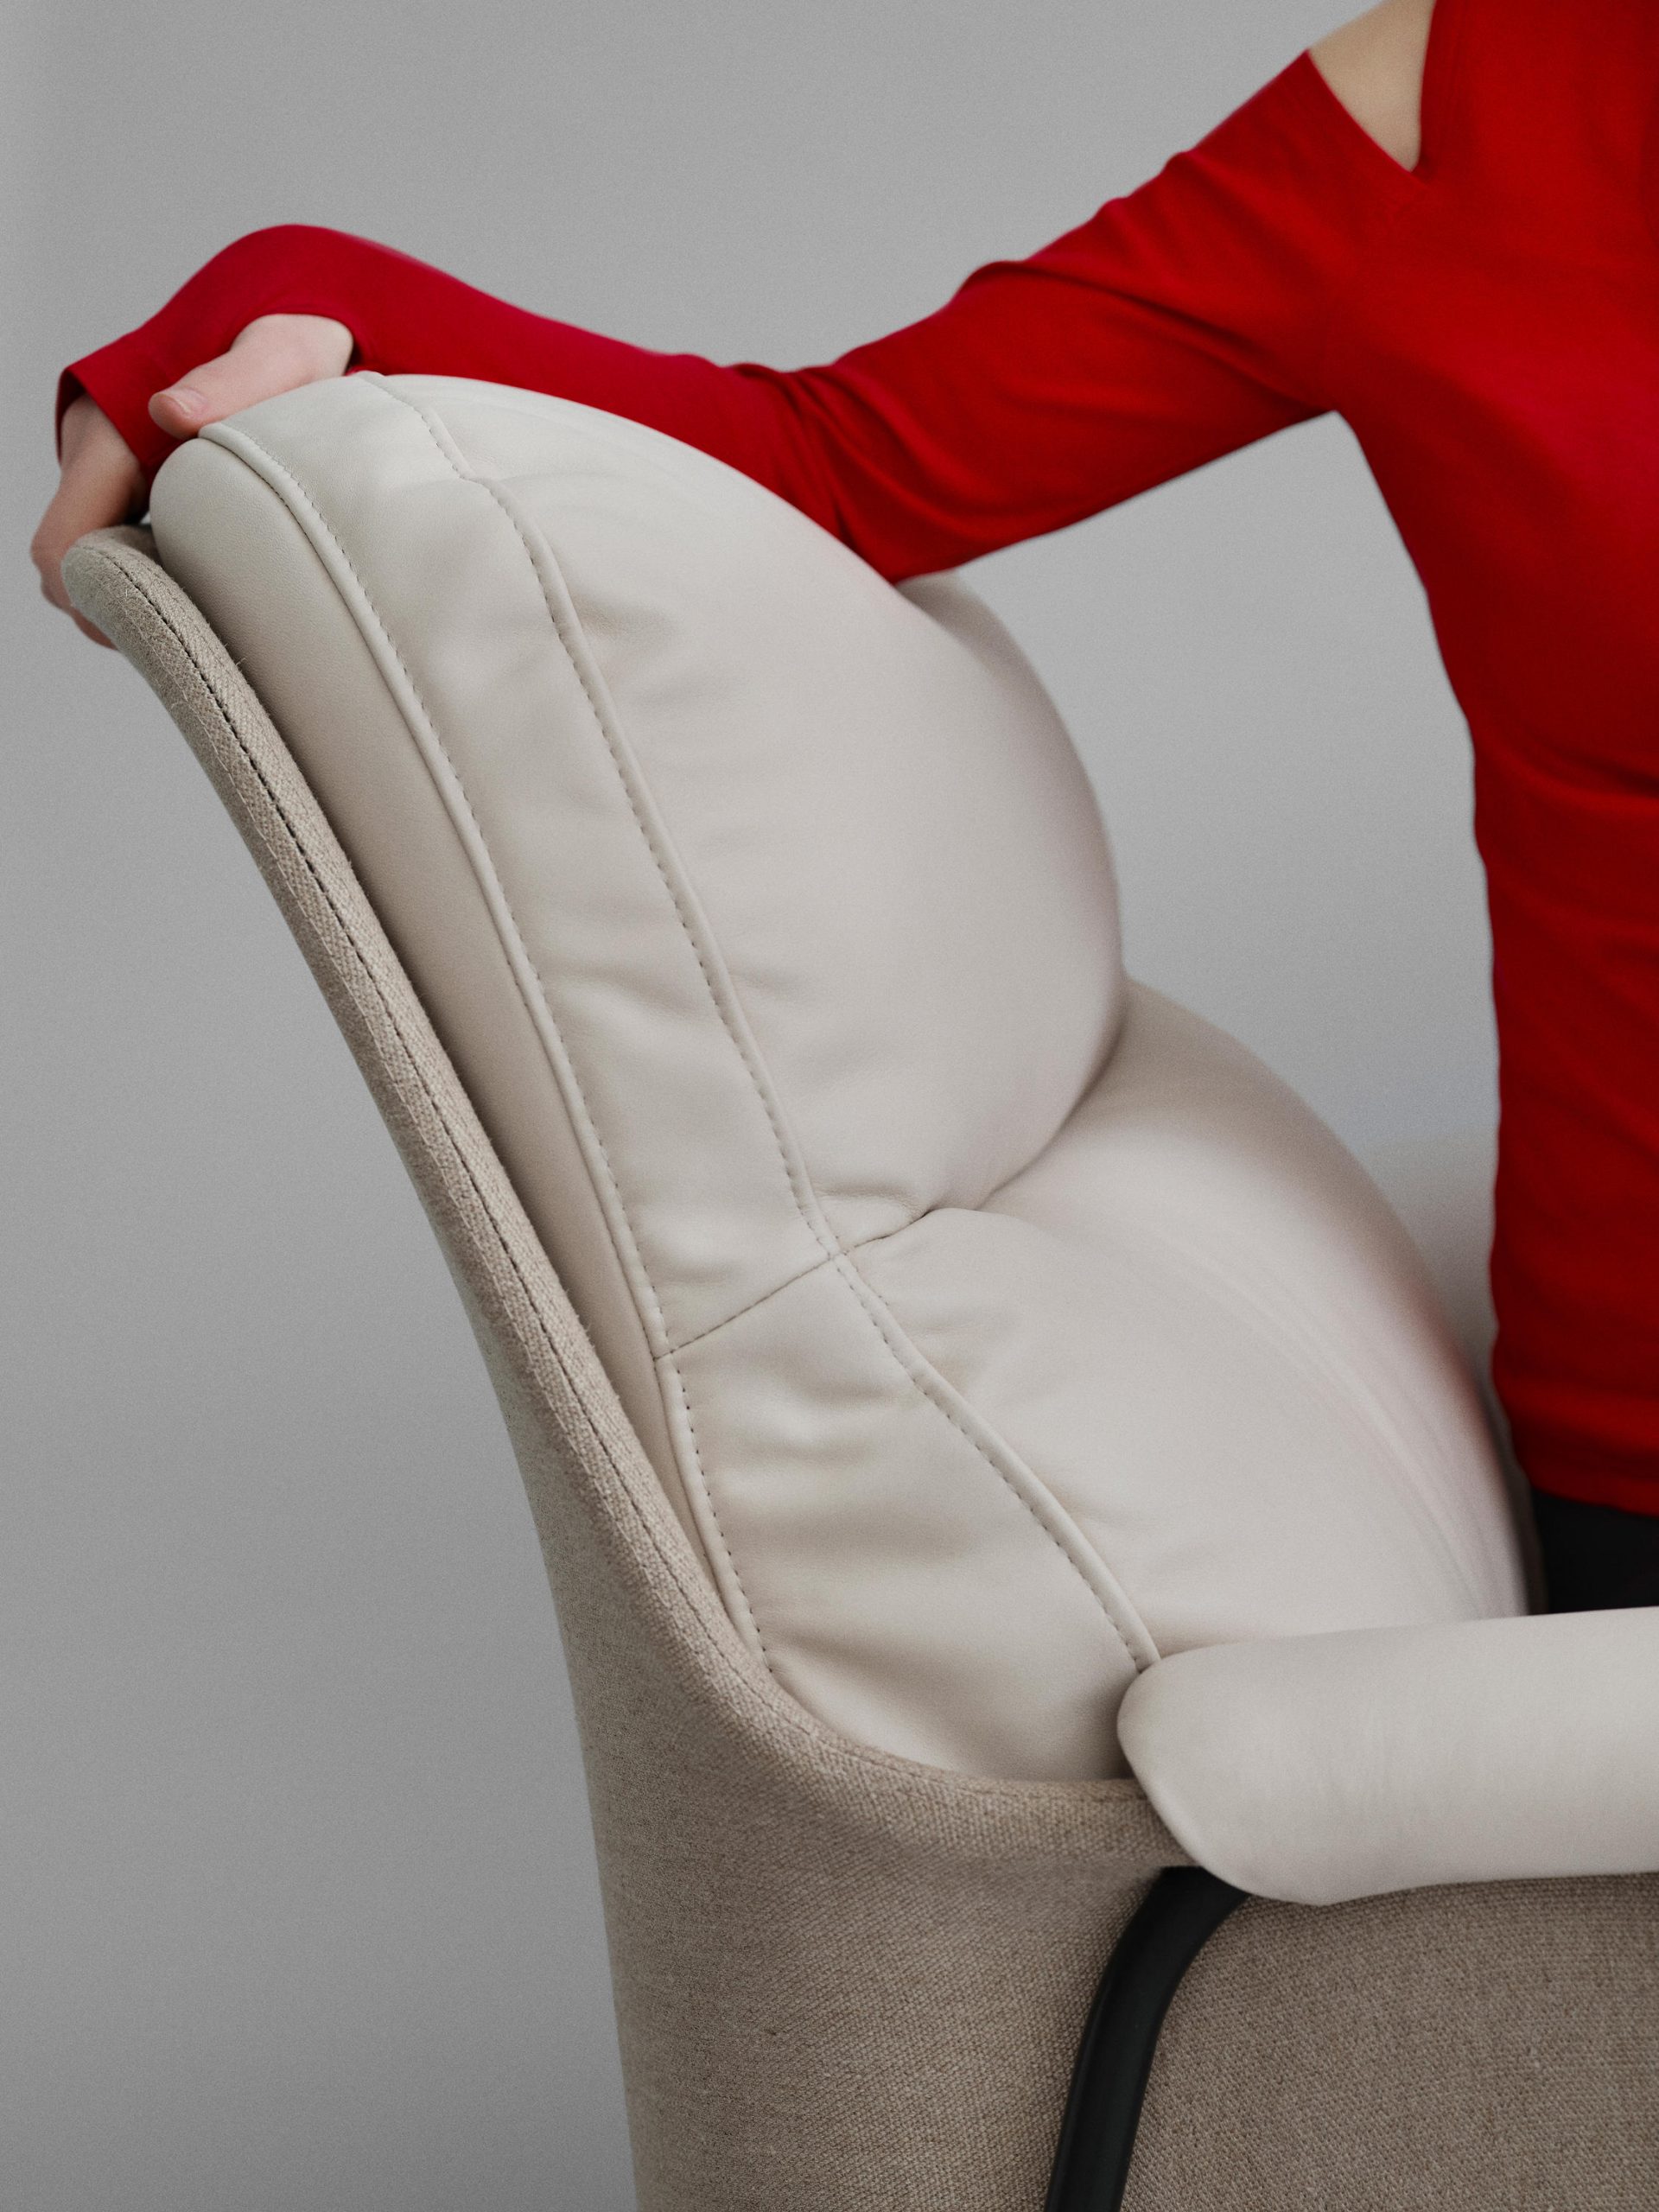 Lyra Lounge Chair by Andreas Engesvik for Fogia